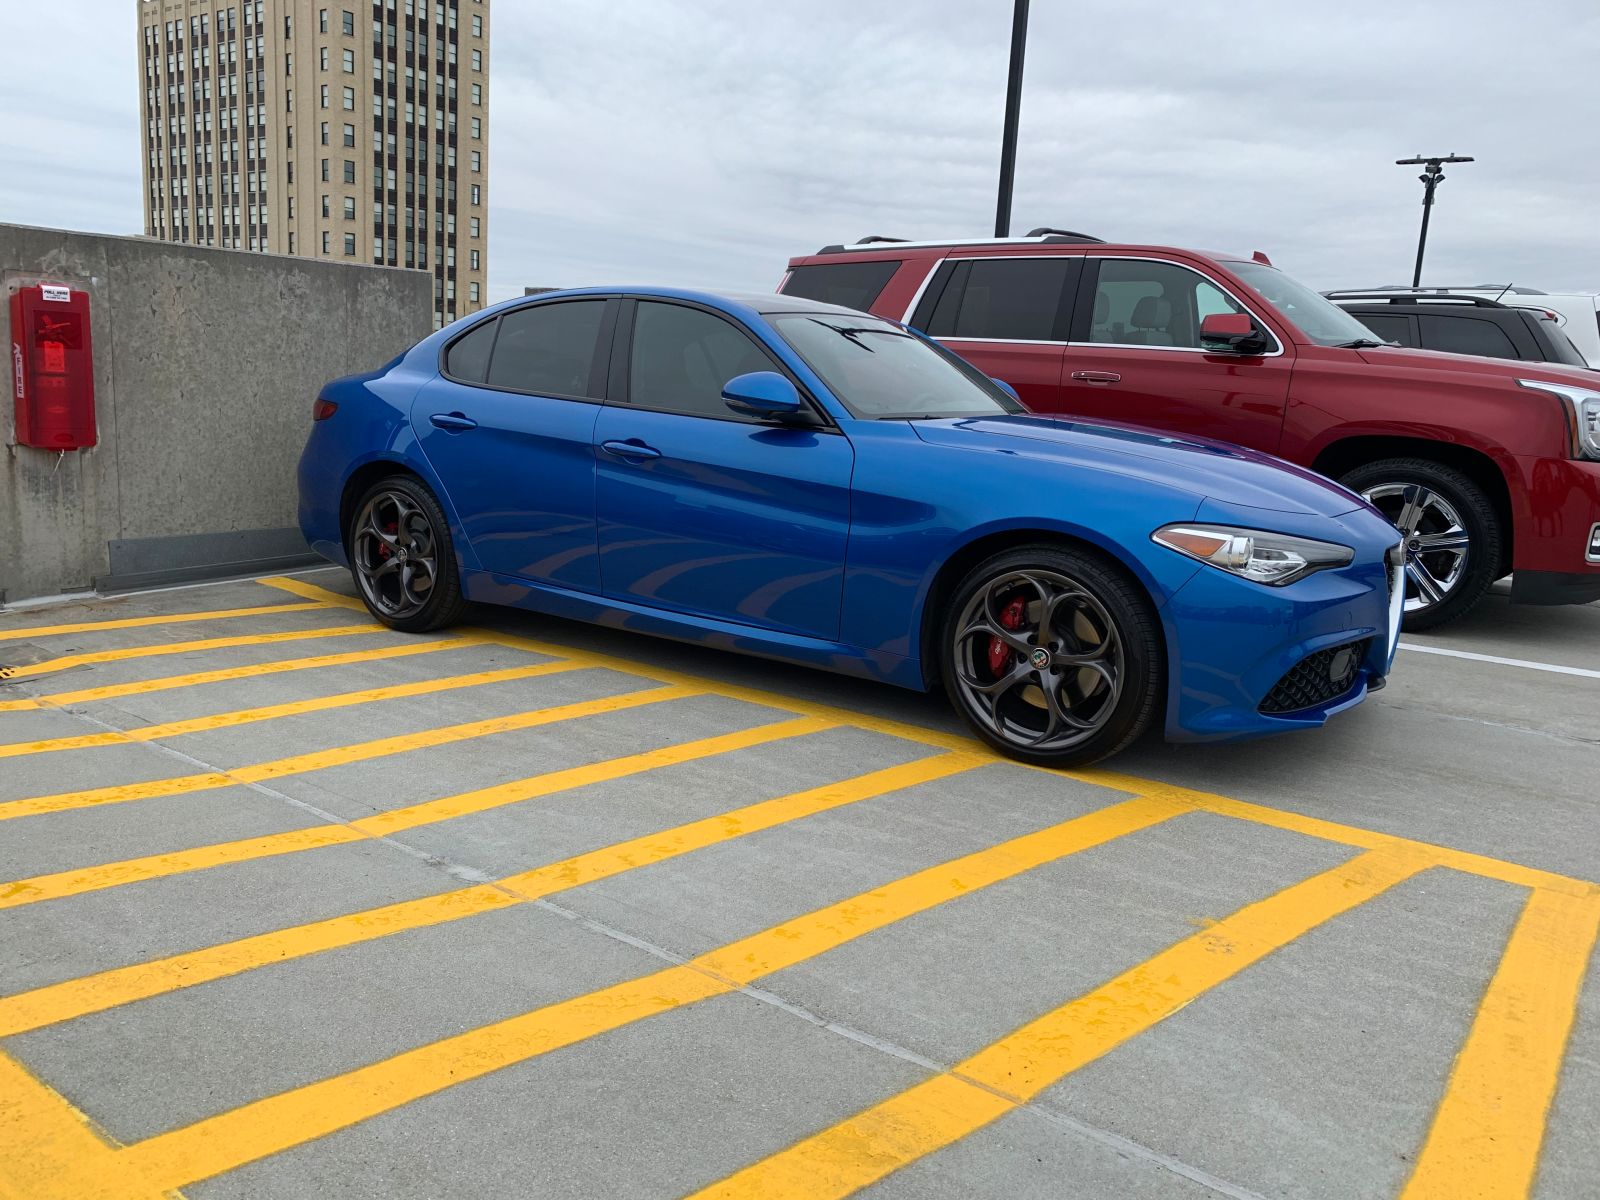 When we got back out to the car this Giulia was on the other side of the space I parked next to.